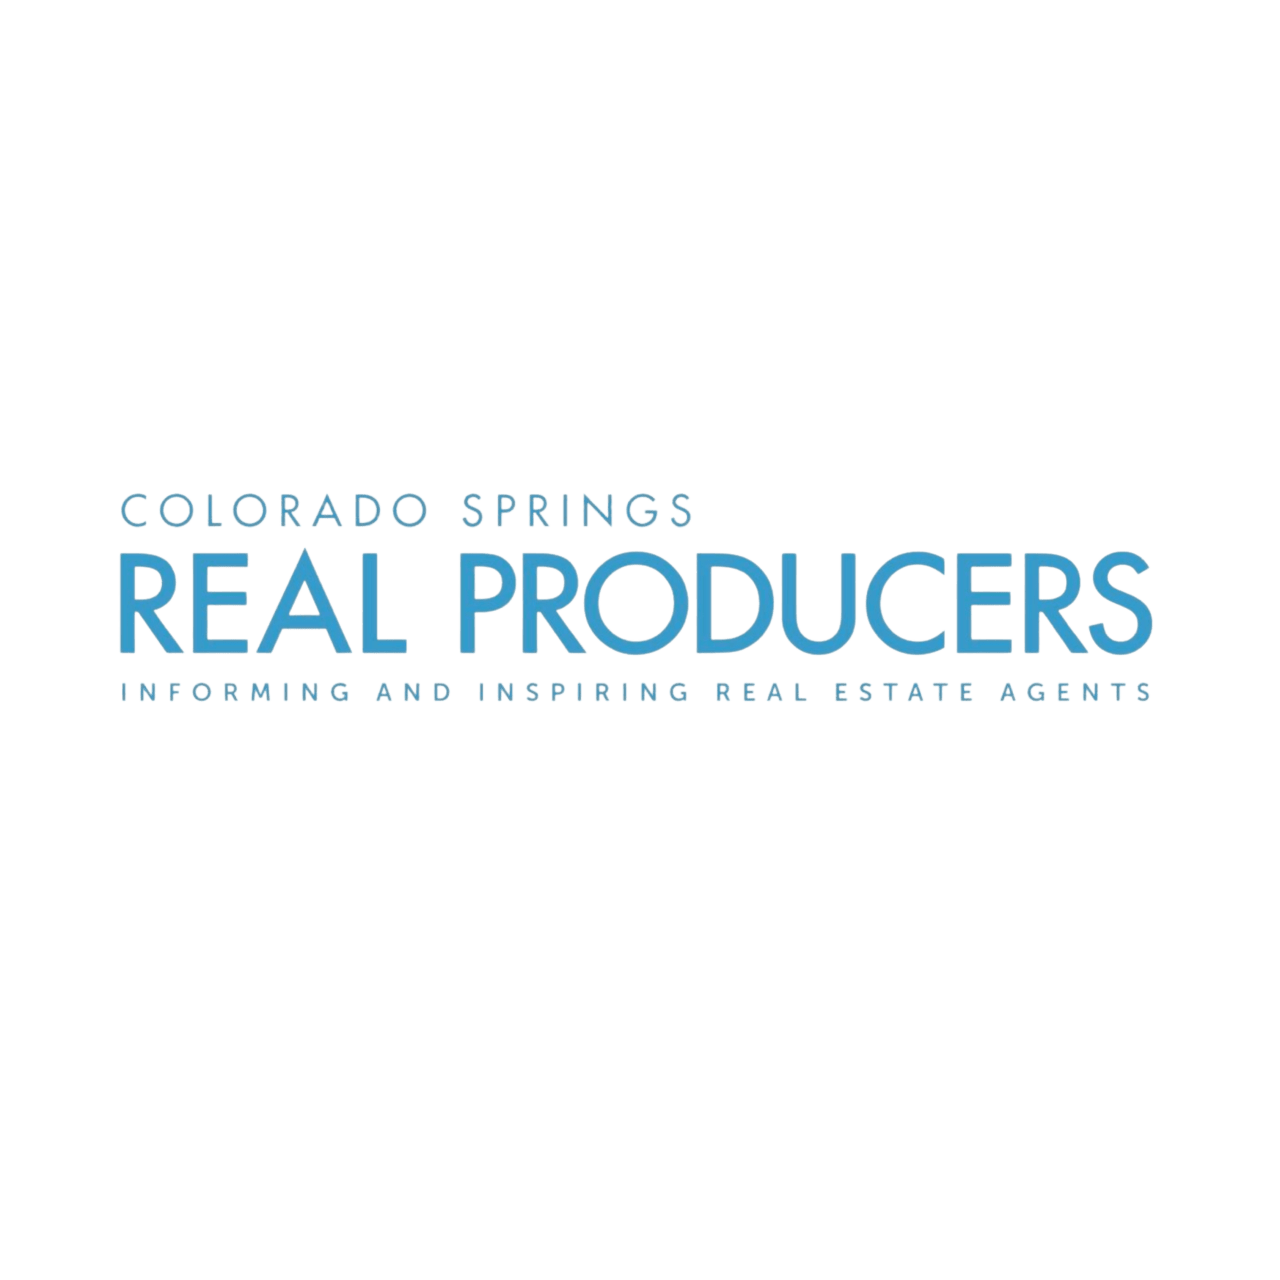 Colorado Springs Real Producers Informing and Inspiring Real Estate Agents